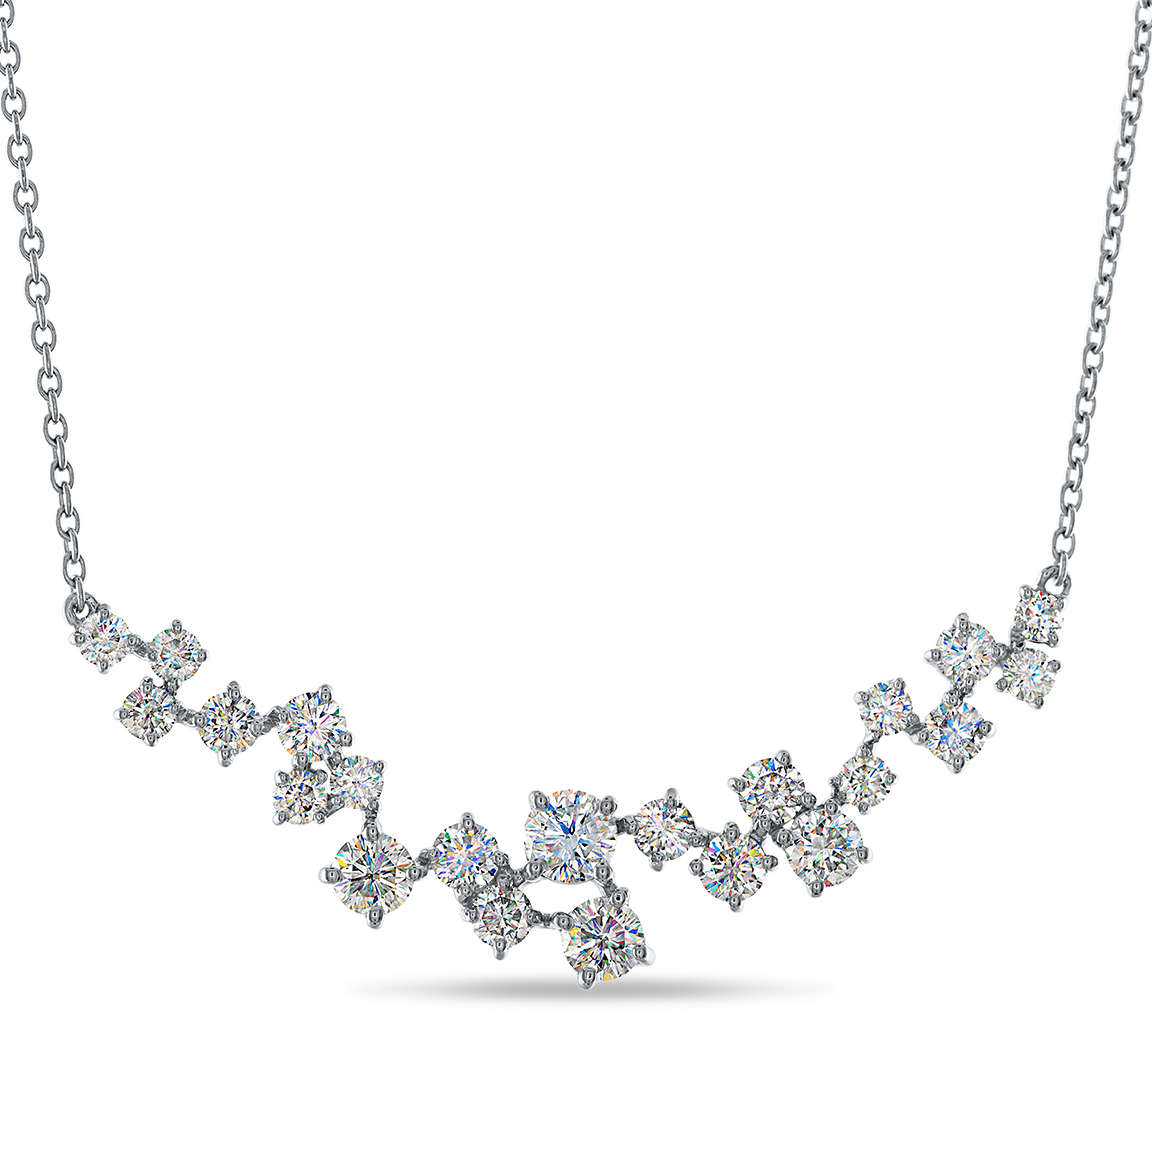 Facets of Fire Scattered Diamond Necklace